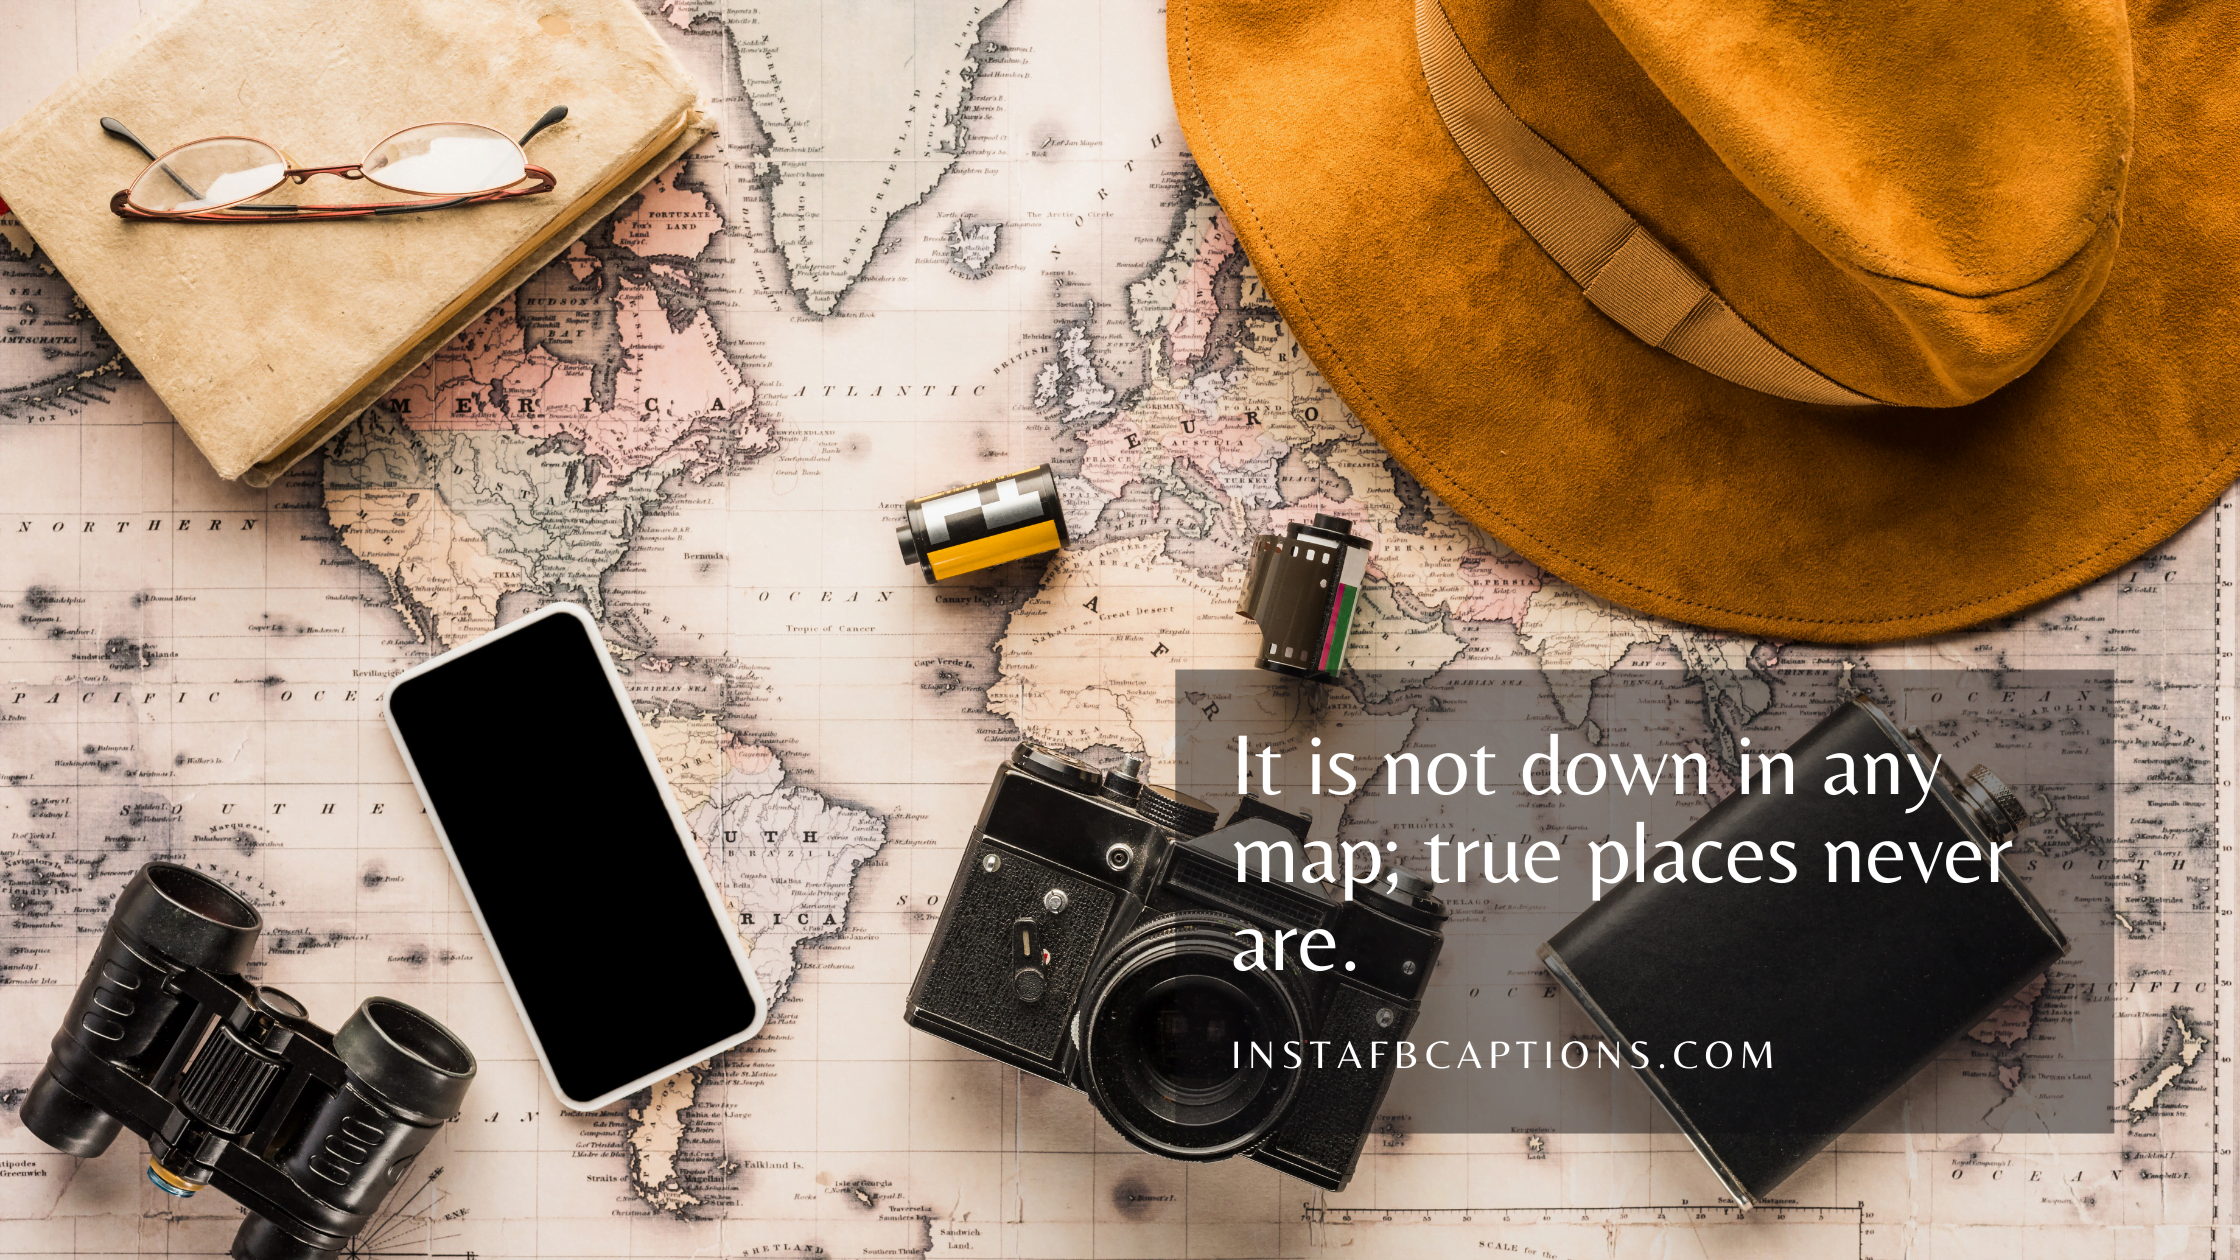 It is not down on any map; true places never are  - Awesome Travel Captions - Travel Captions For Travelling Instagram Reels in 2023